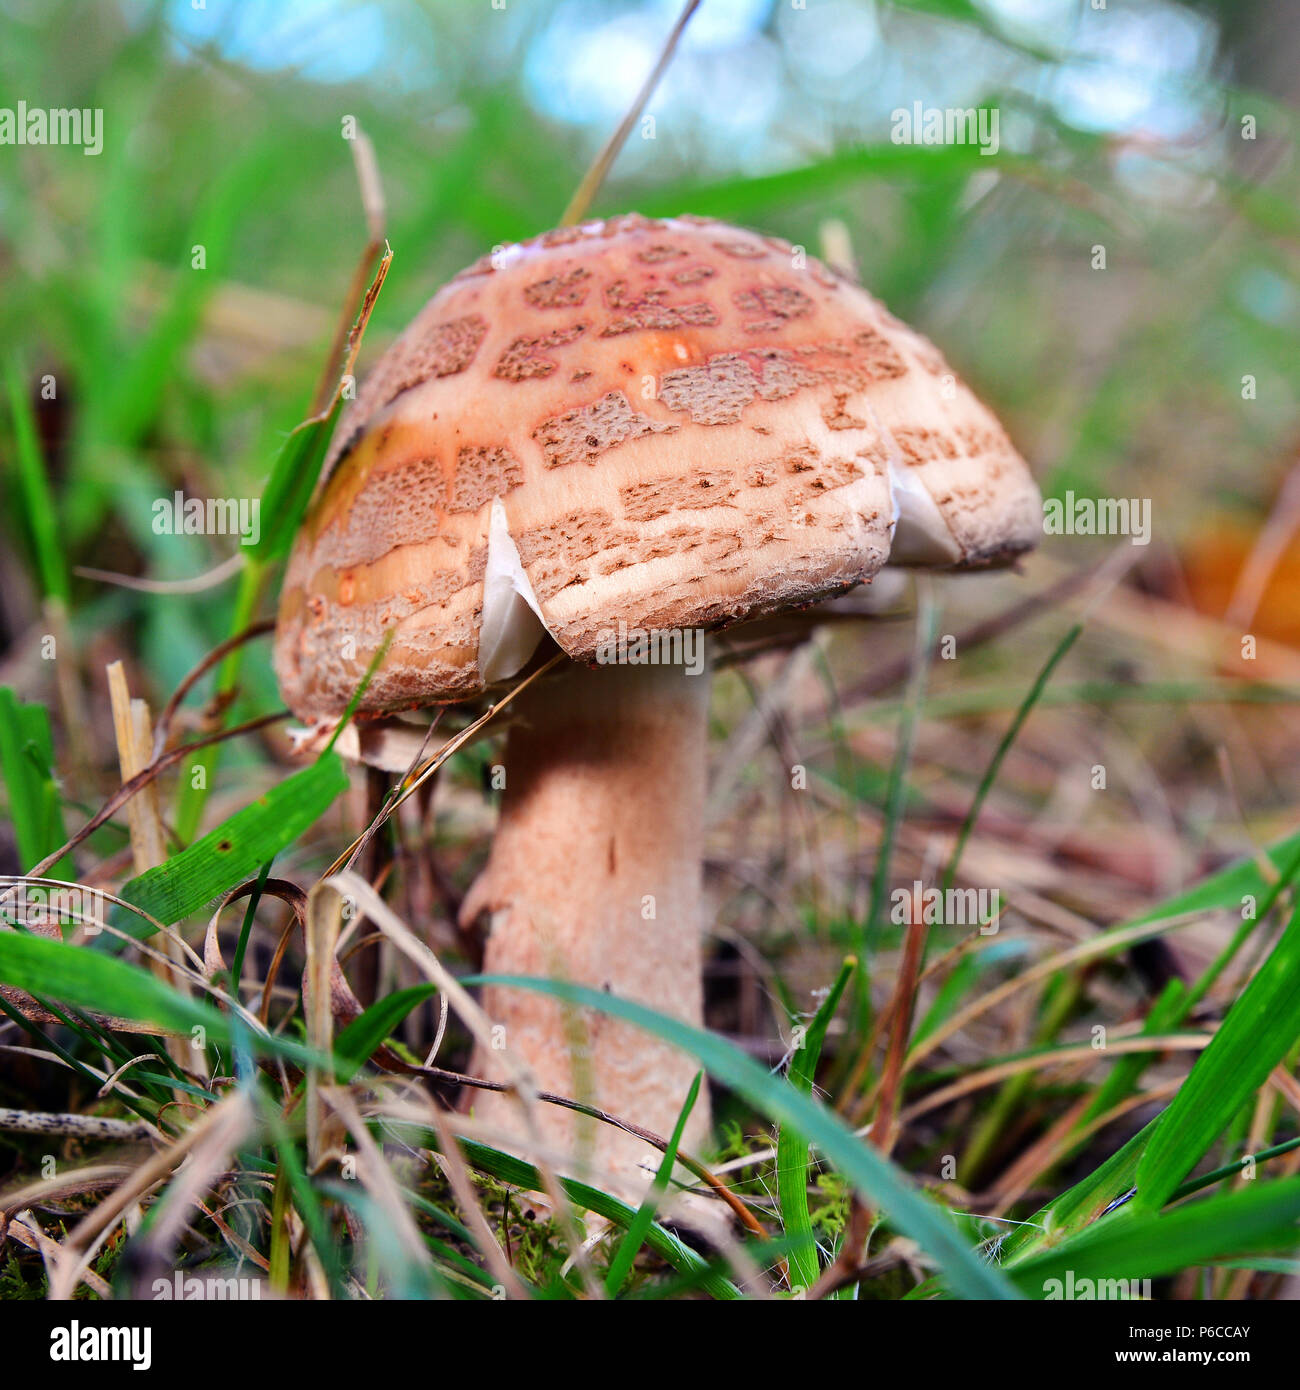 an edible amanita rubescens mushroom in the forest Stock Photo